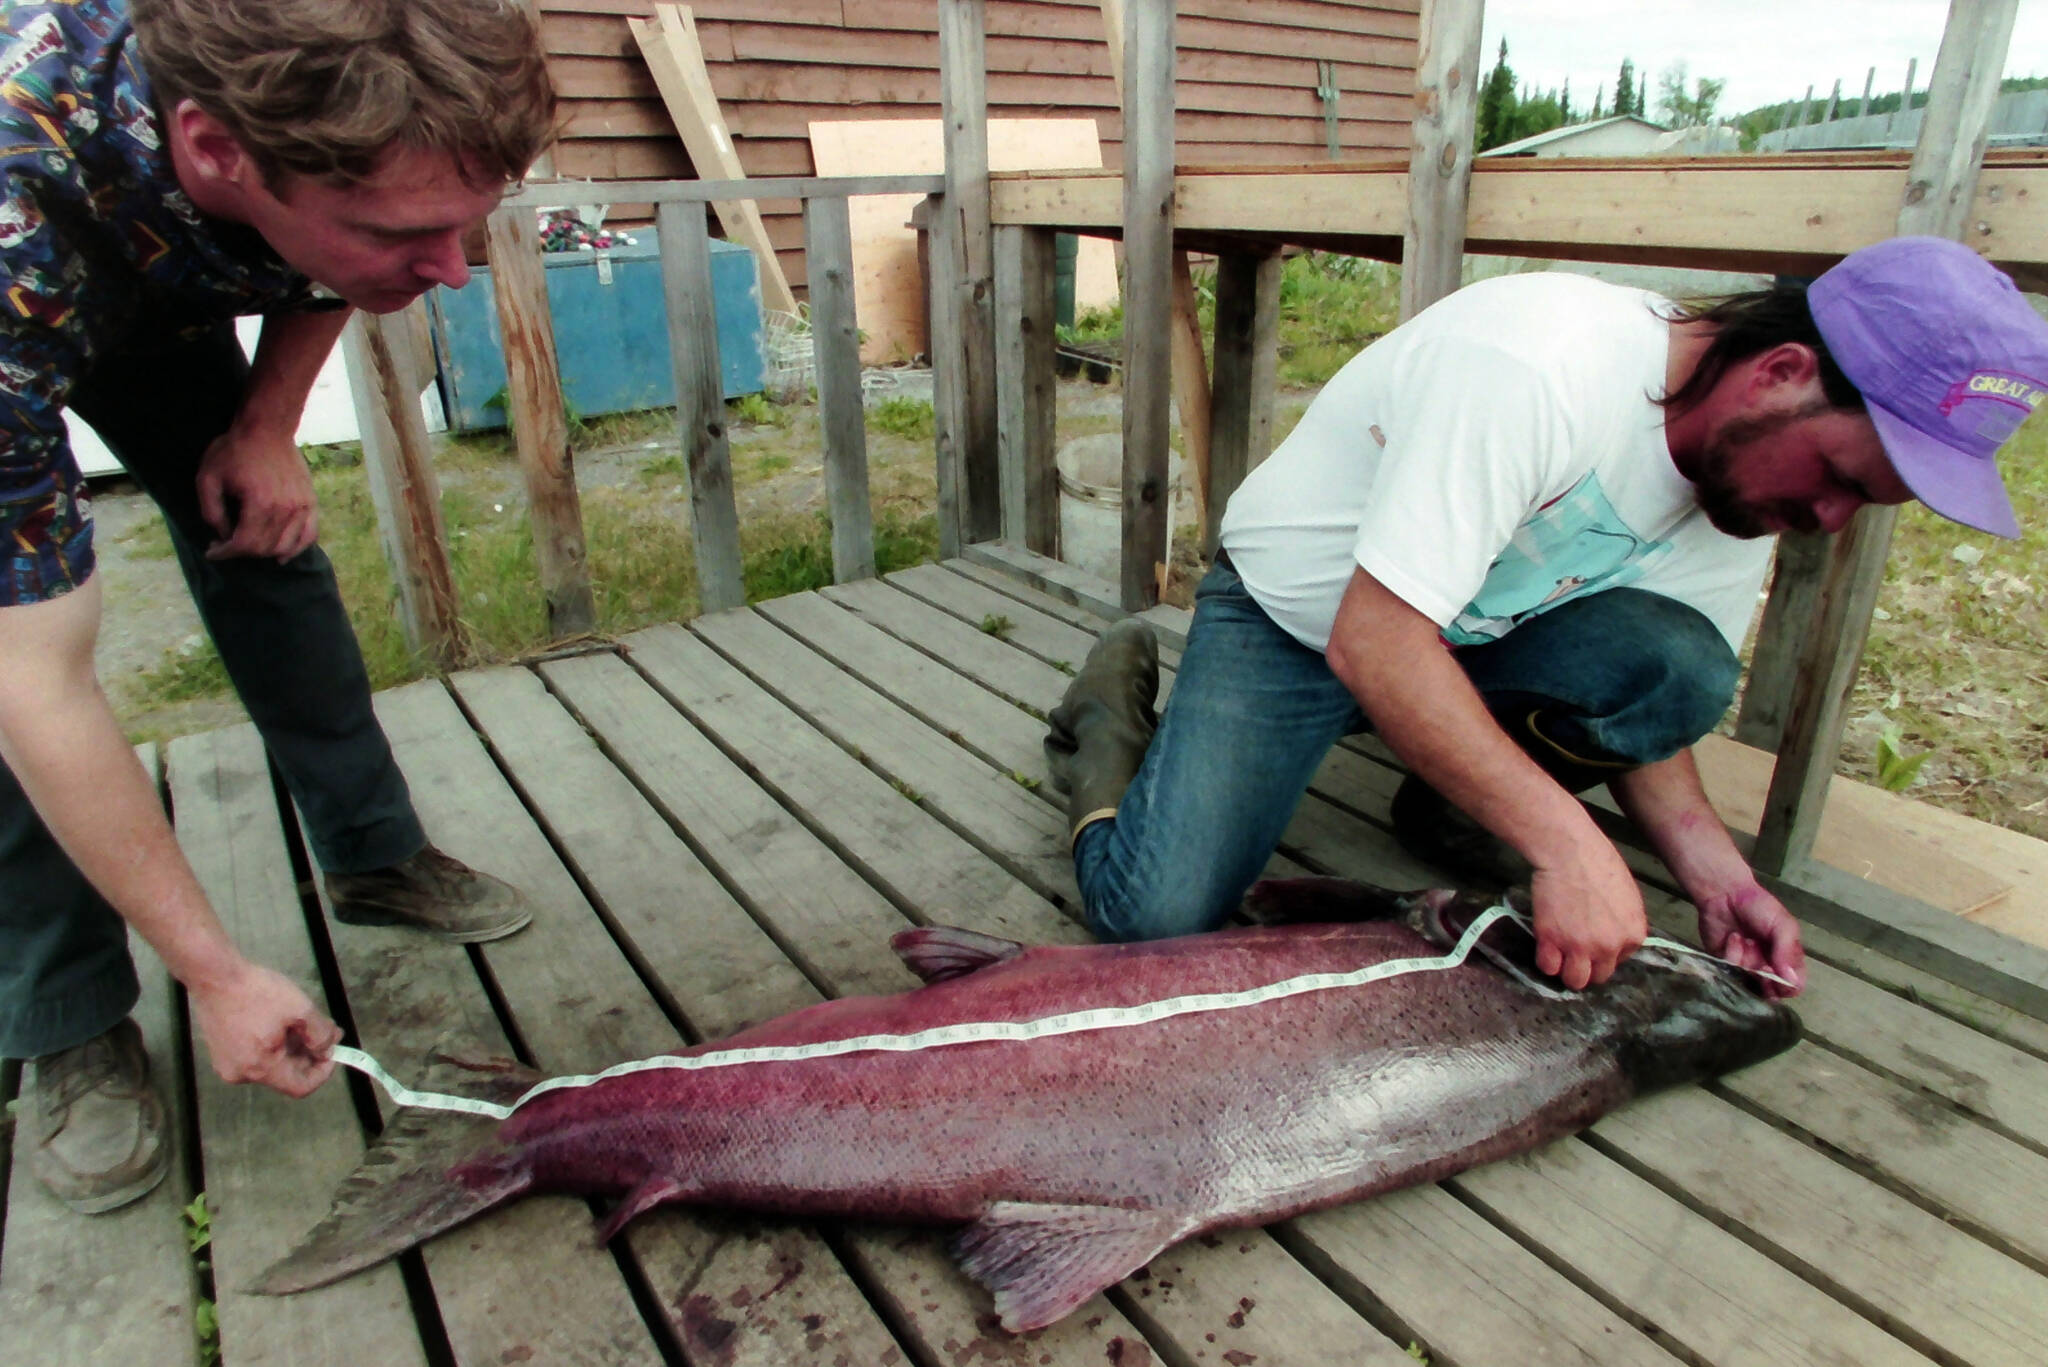 A stock of concern: Board of Fish to consider action plan for king salmon  management